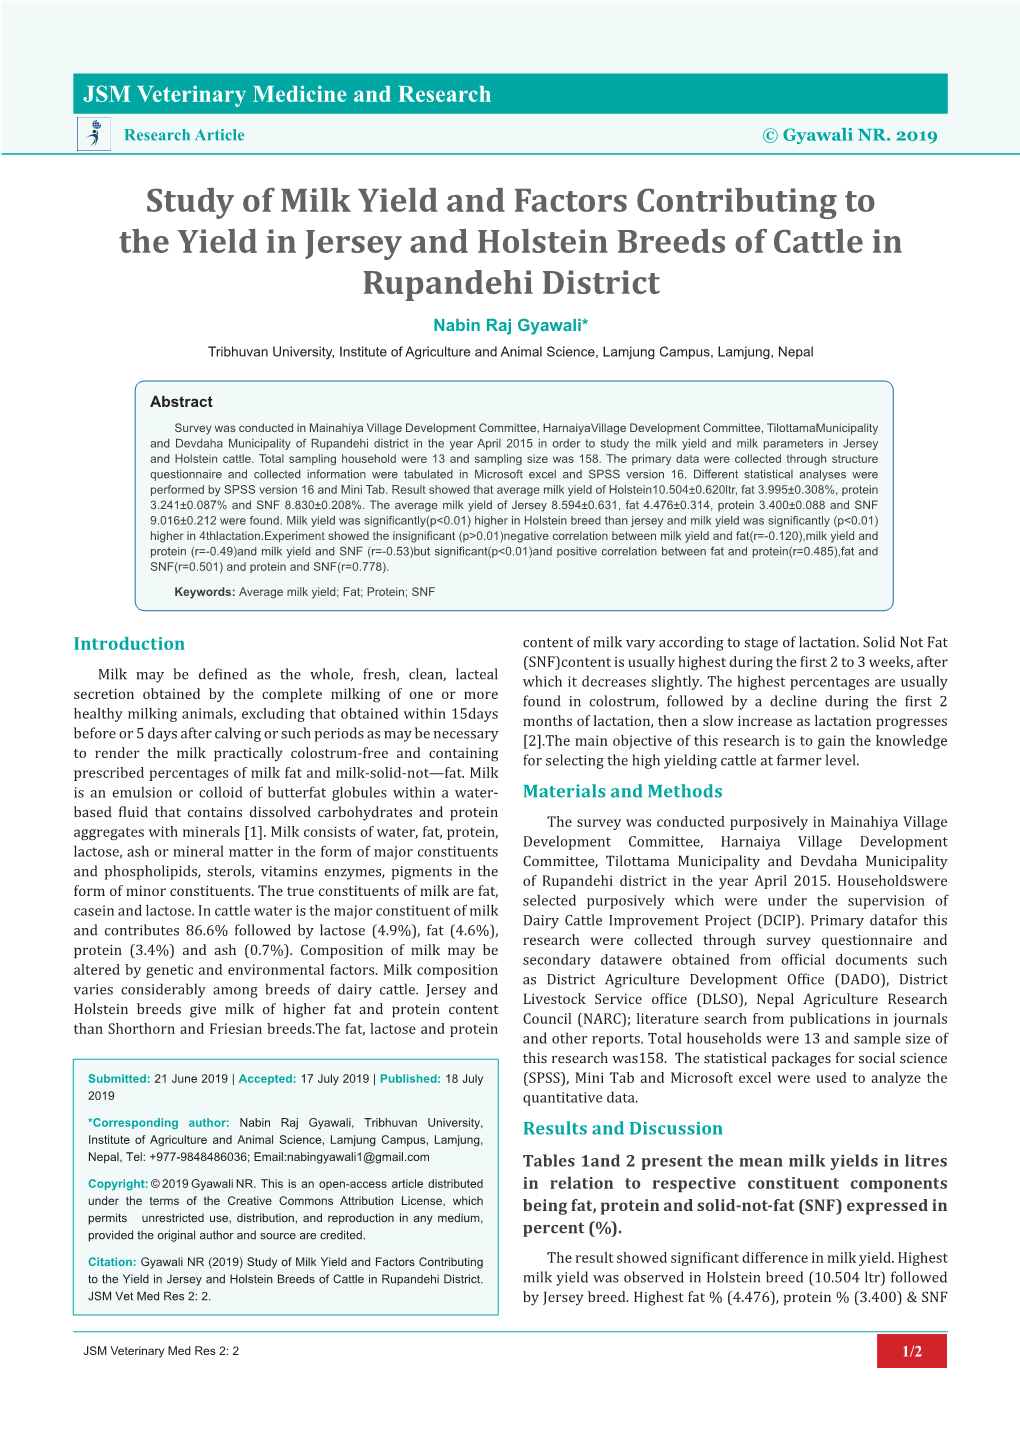 Study of Milk Yield and Factors Contributing to the Yield in Jersey